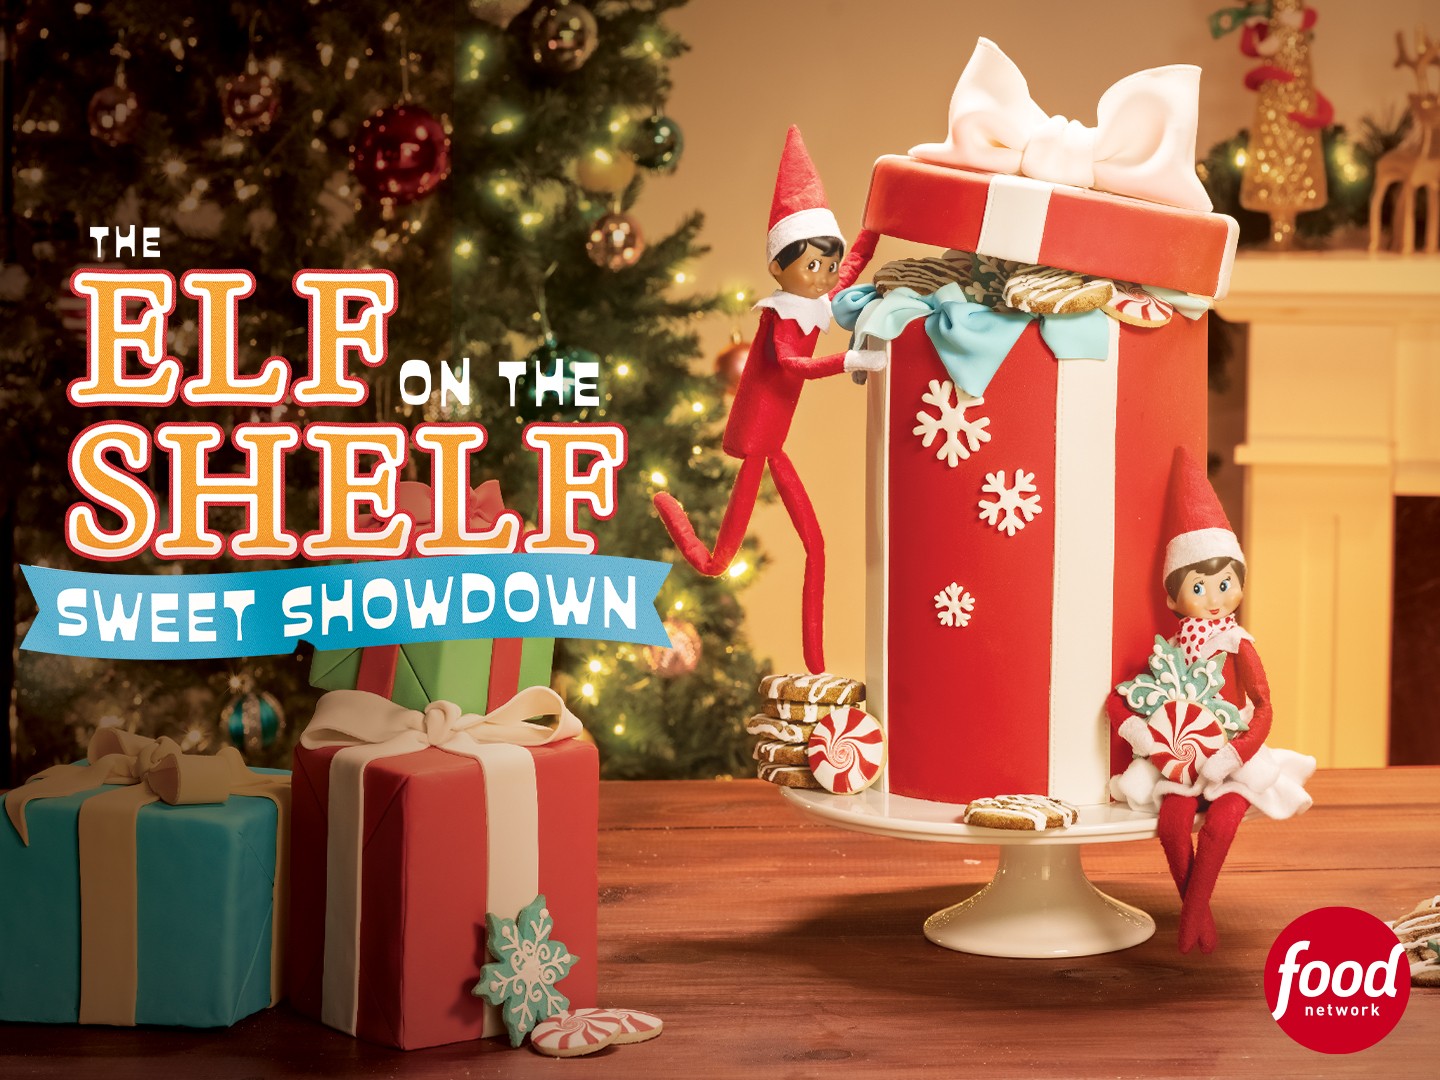 What is The Elf on the Shelf Story and What Are the Rules